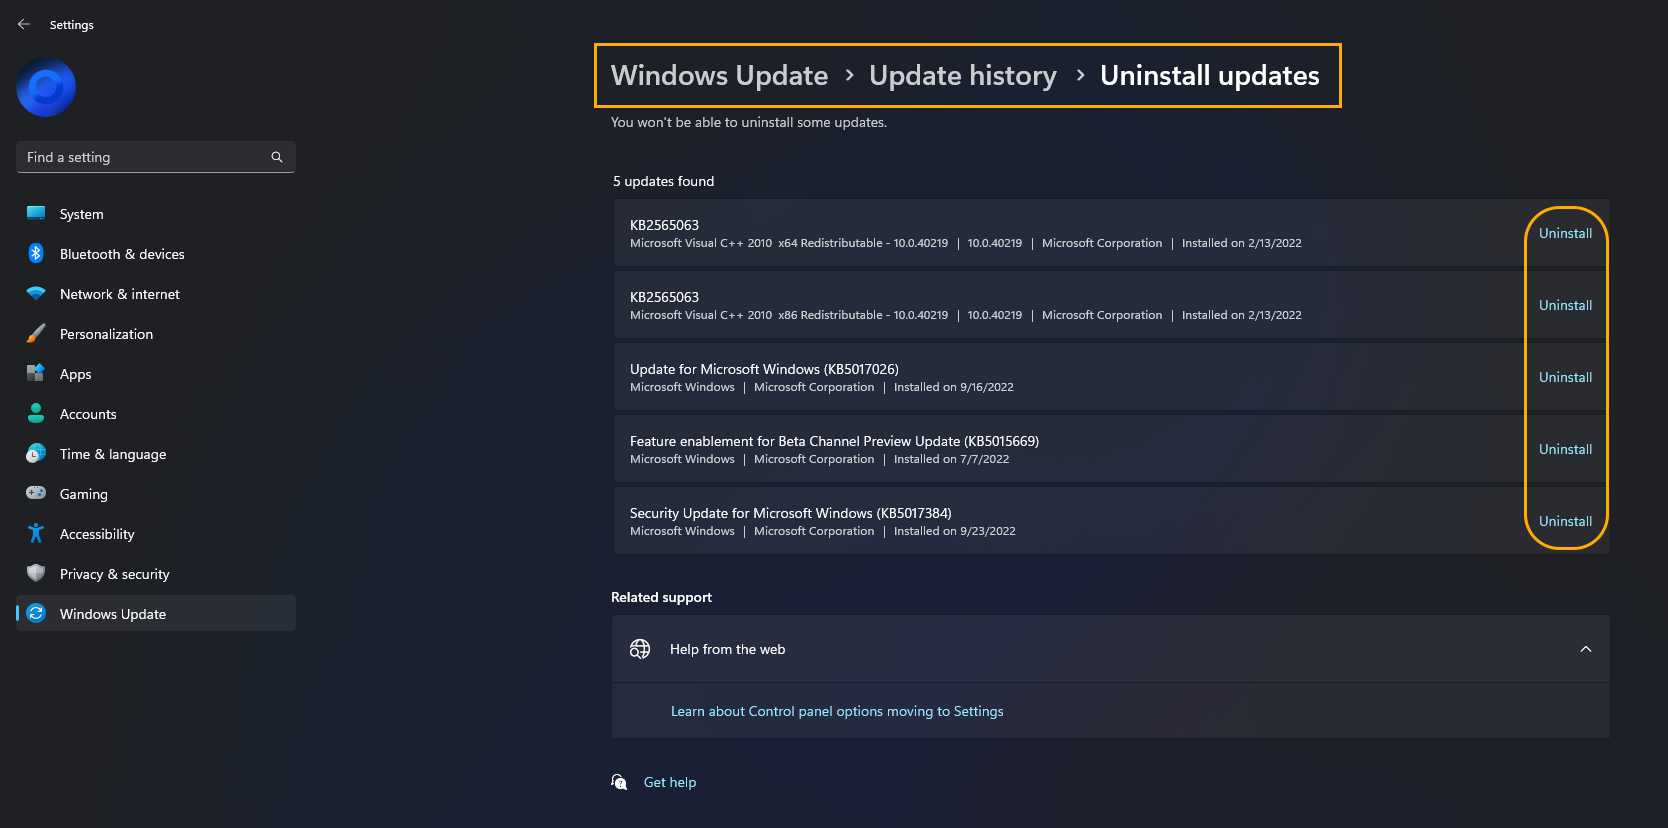 How to fix Windows 11 update 22H2 causing performance issues with NVIDIA graphics